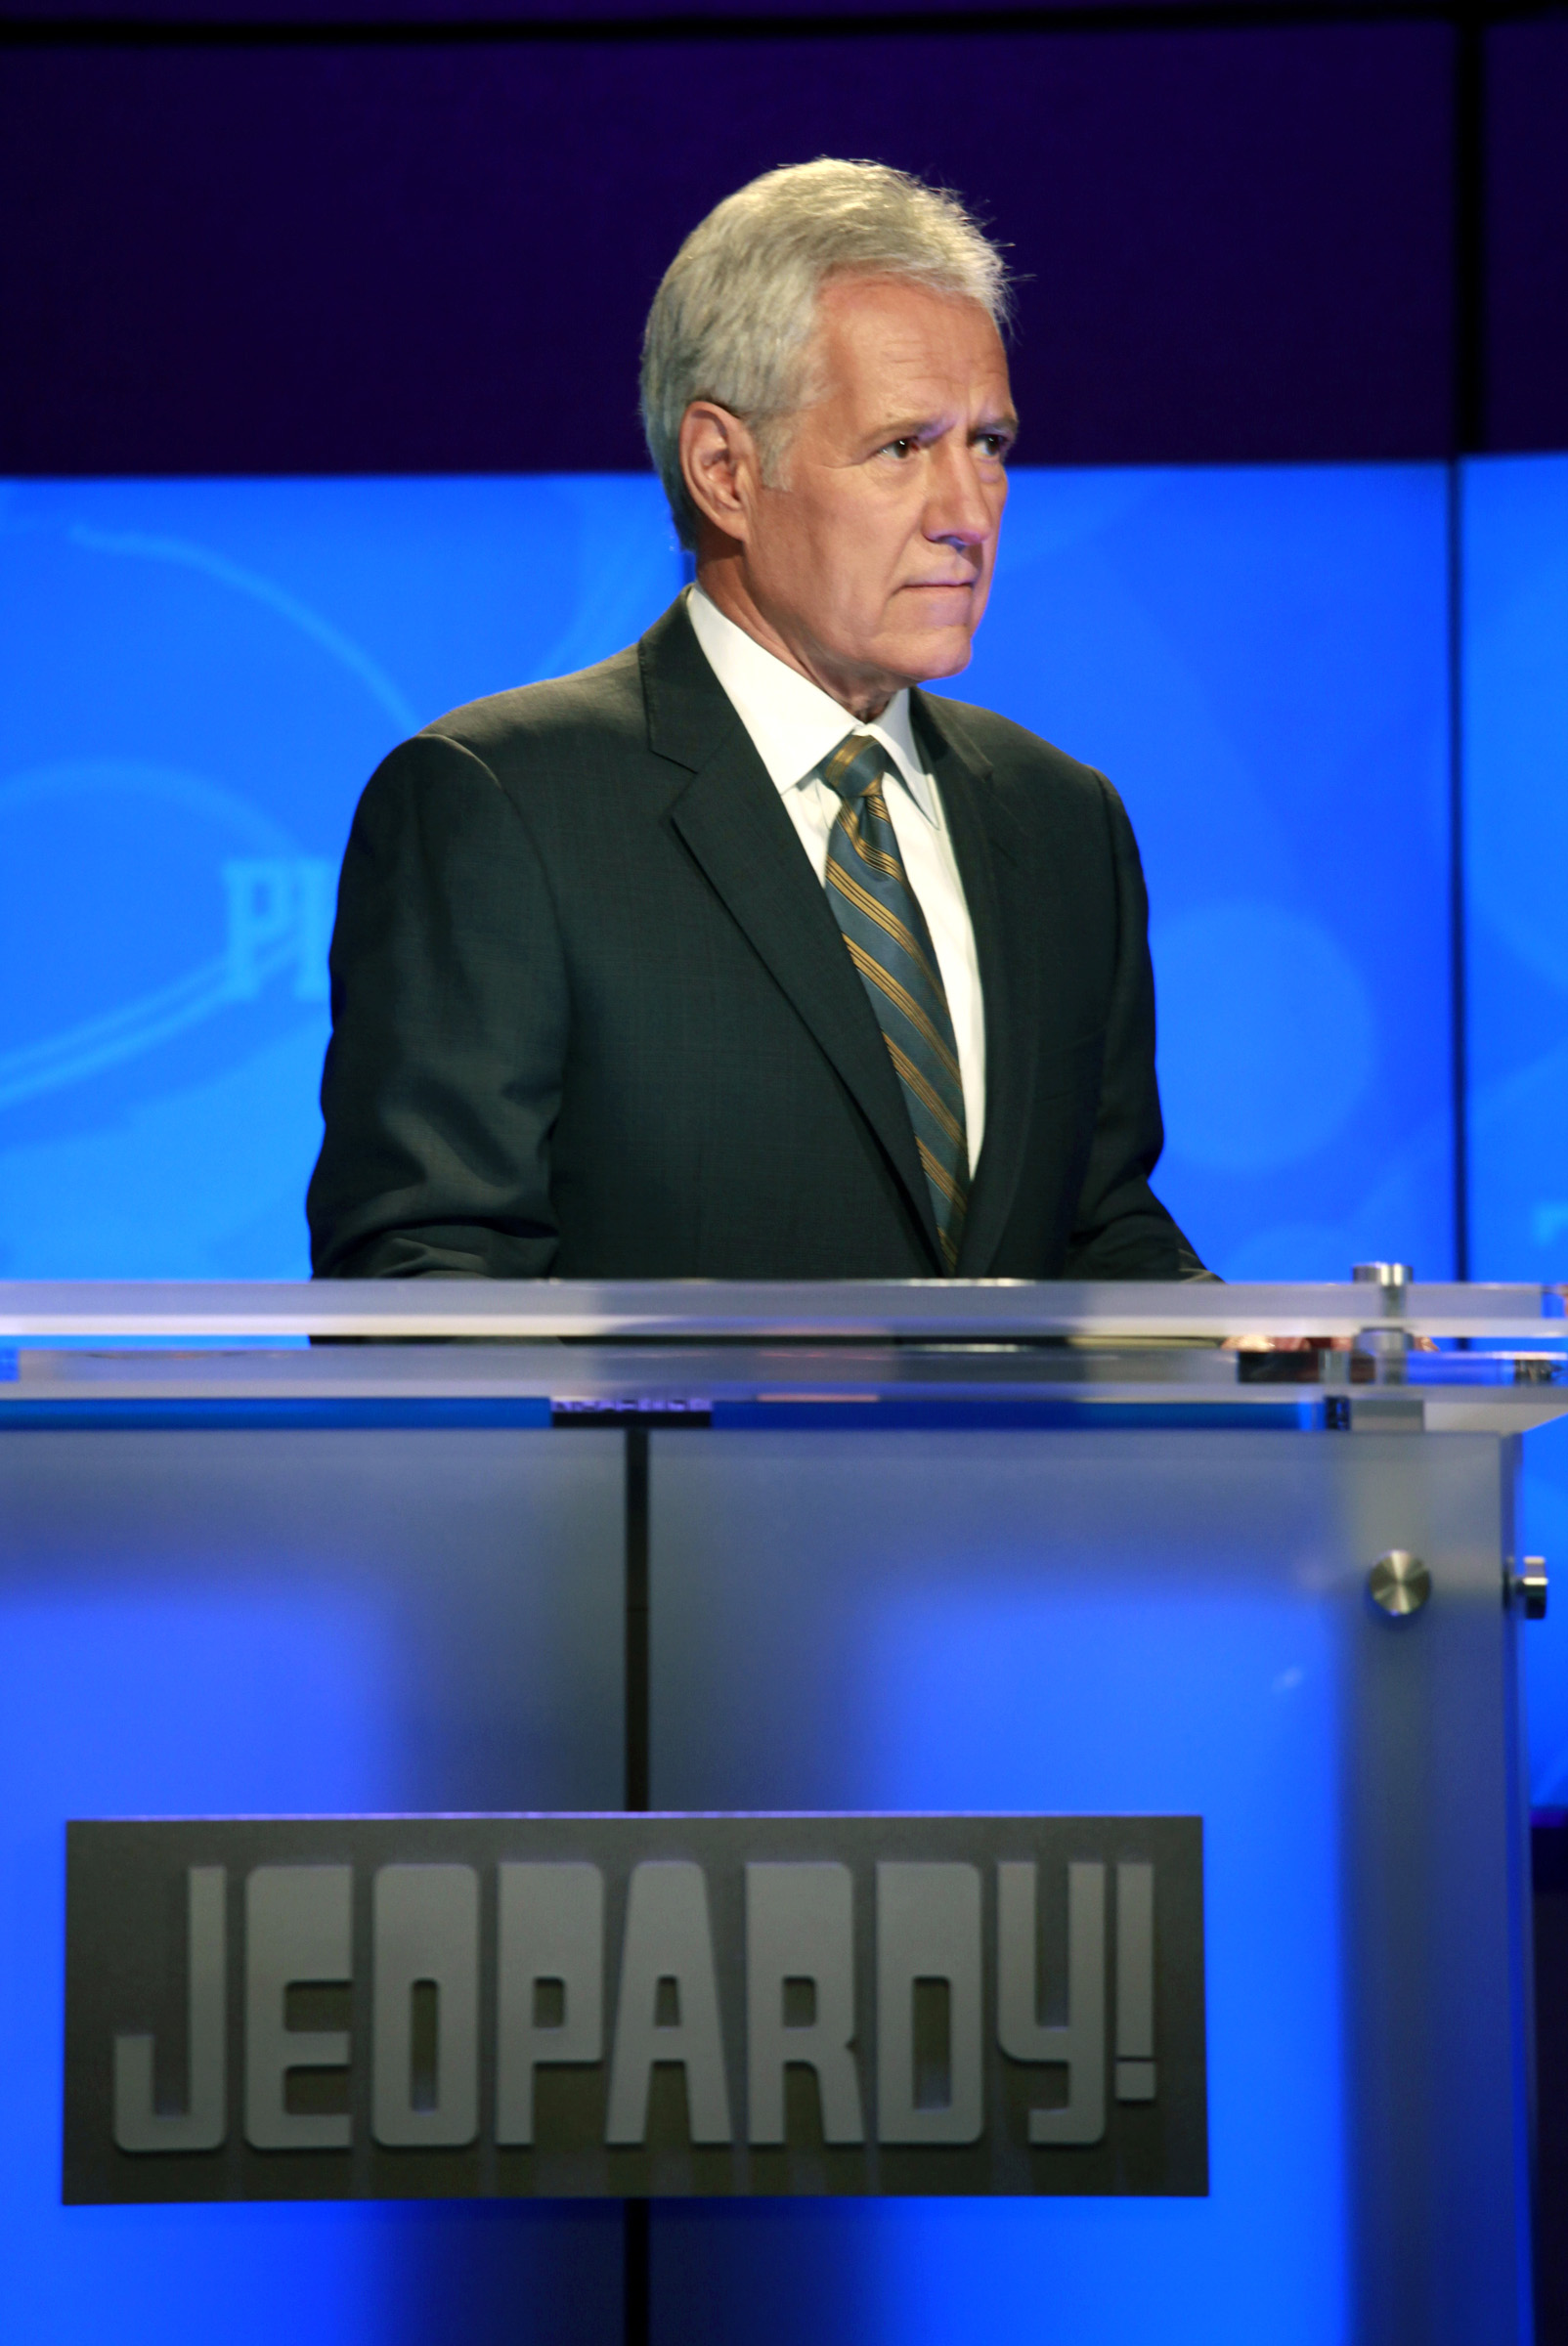 PHOTO: The host of Jeopardy, Alex Trebek, rehearses for an upcoming show, Jan. 13, 2011.  